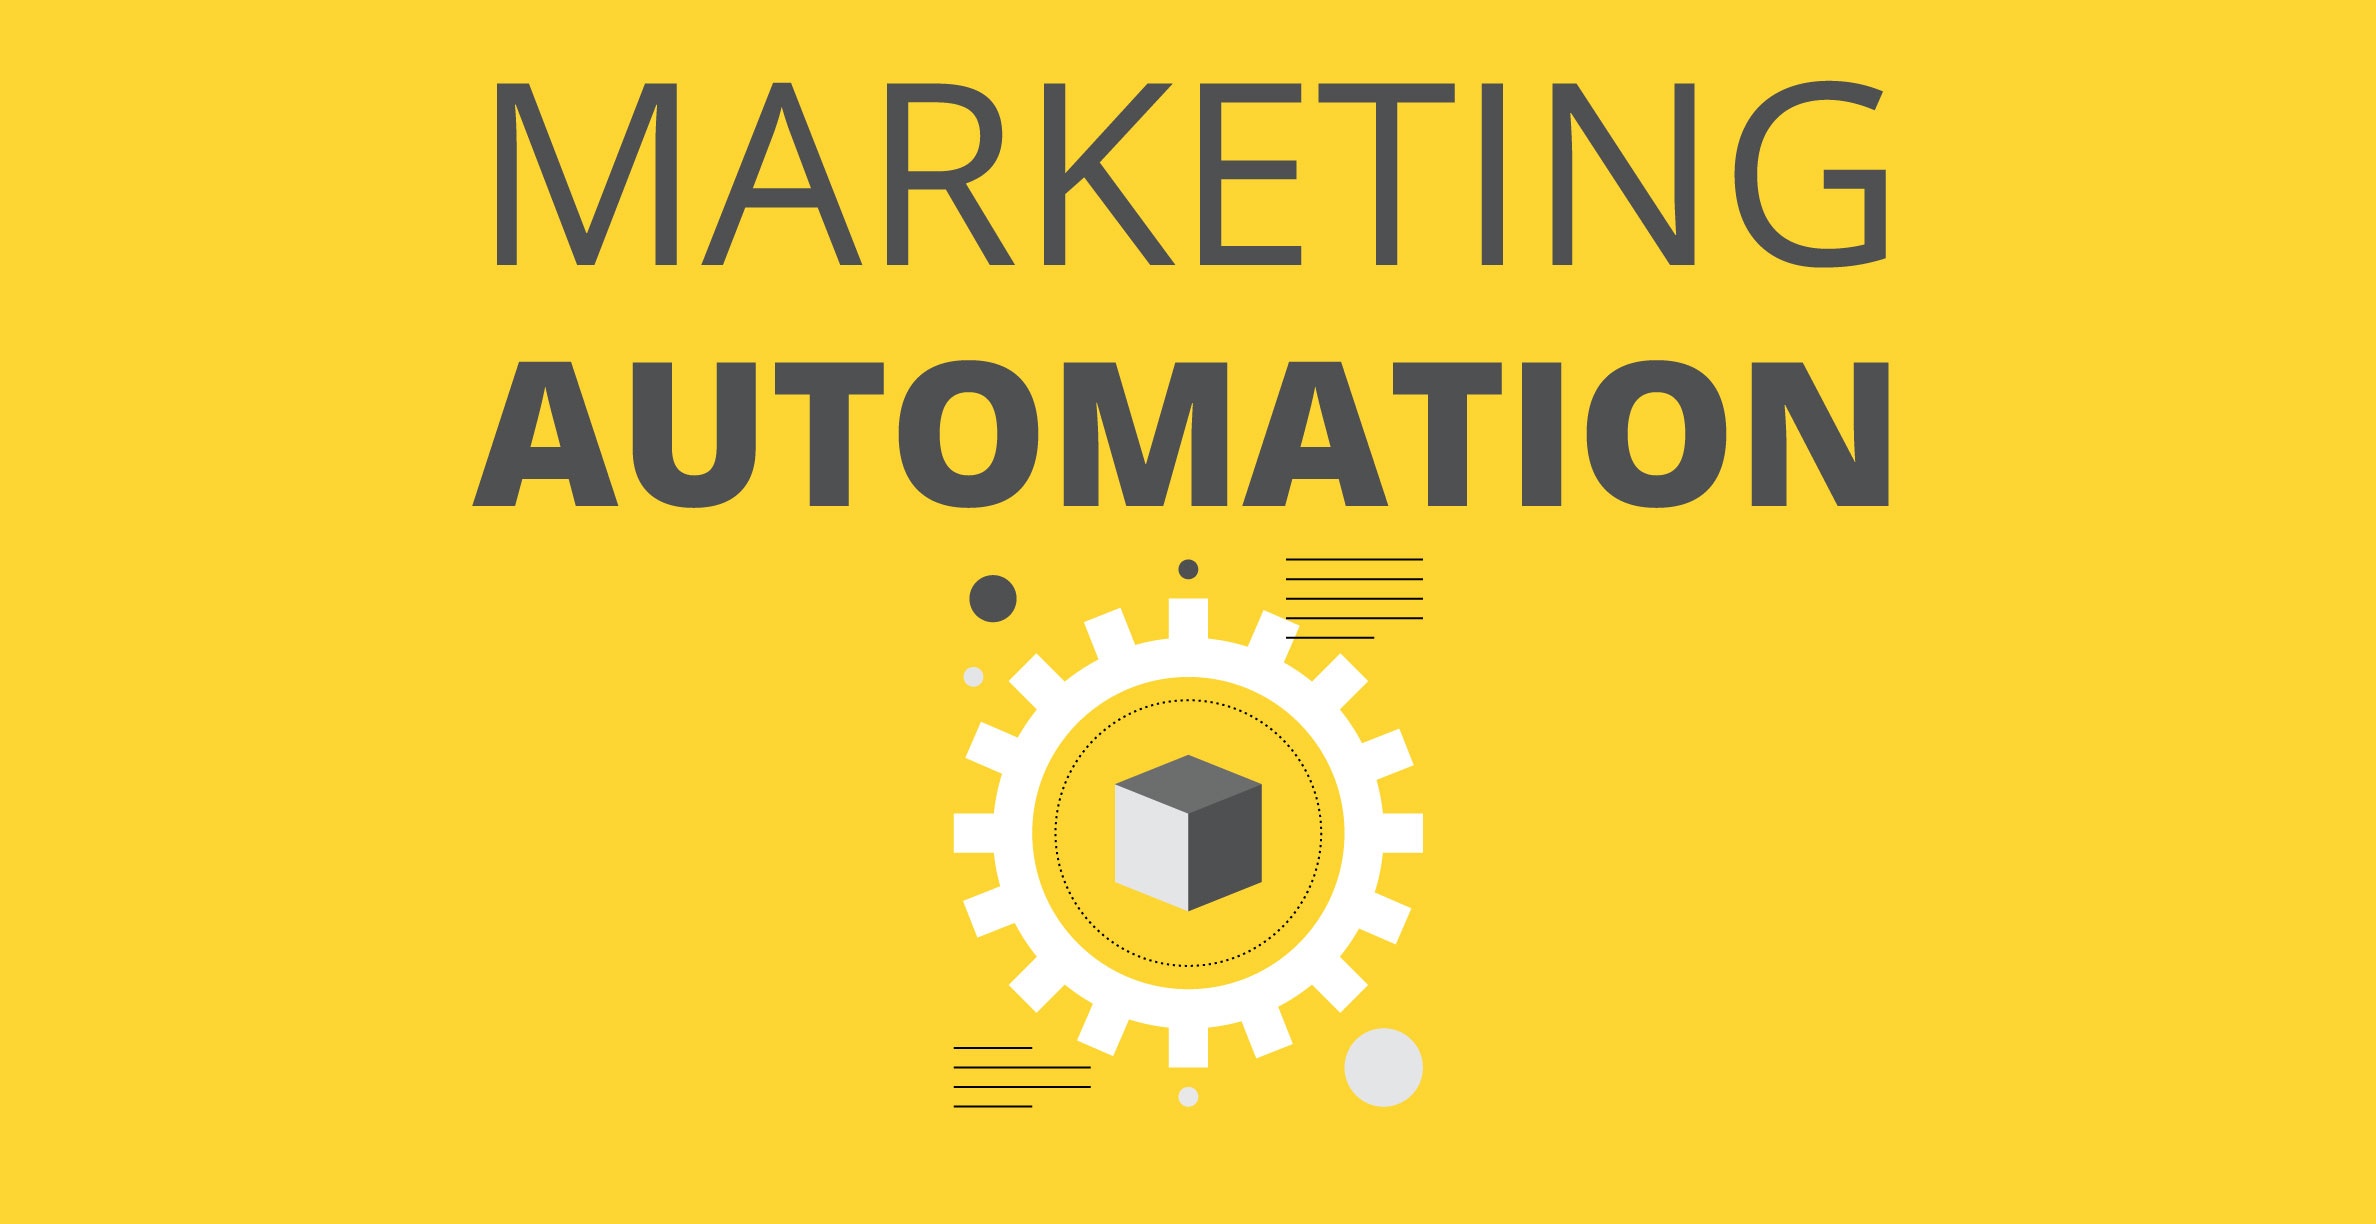 Illustration of marketing automation concept using a cog